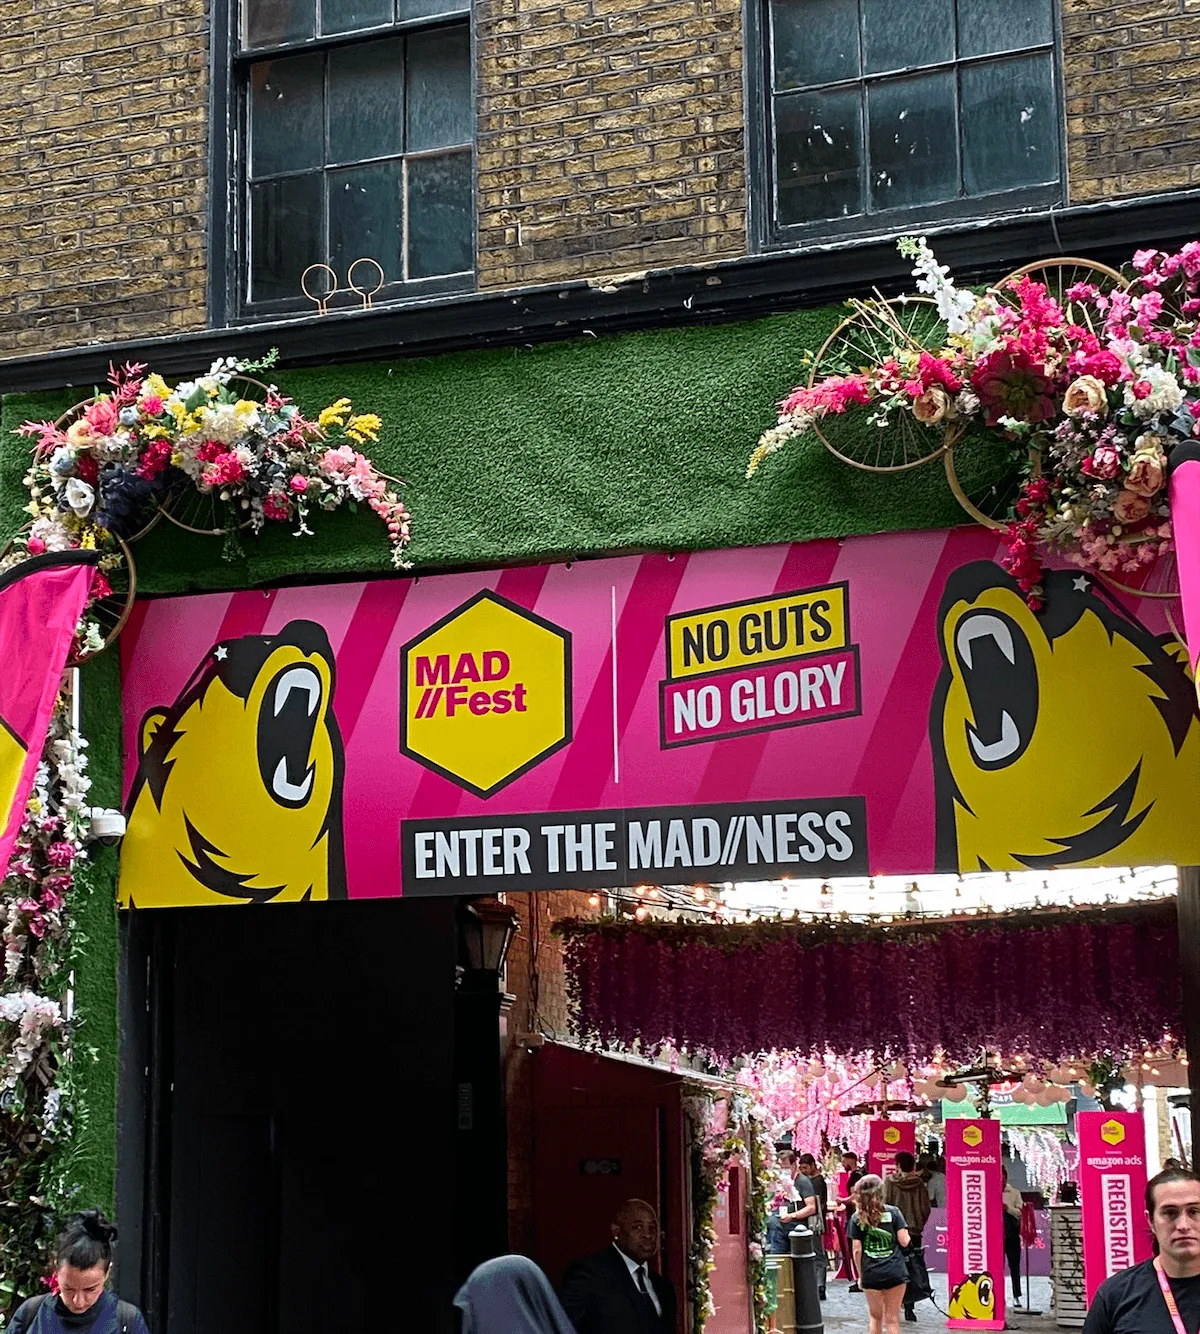 The entrance of Mad Fest London.